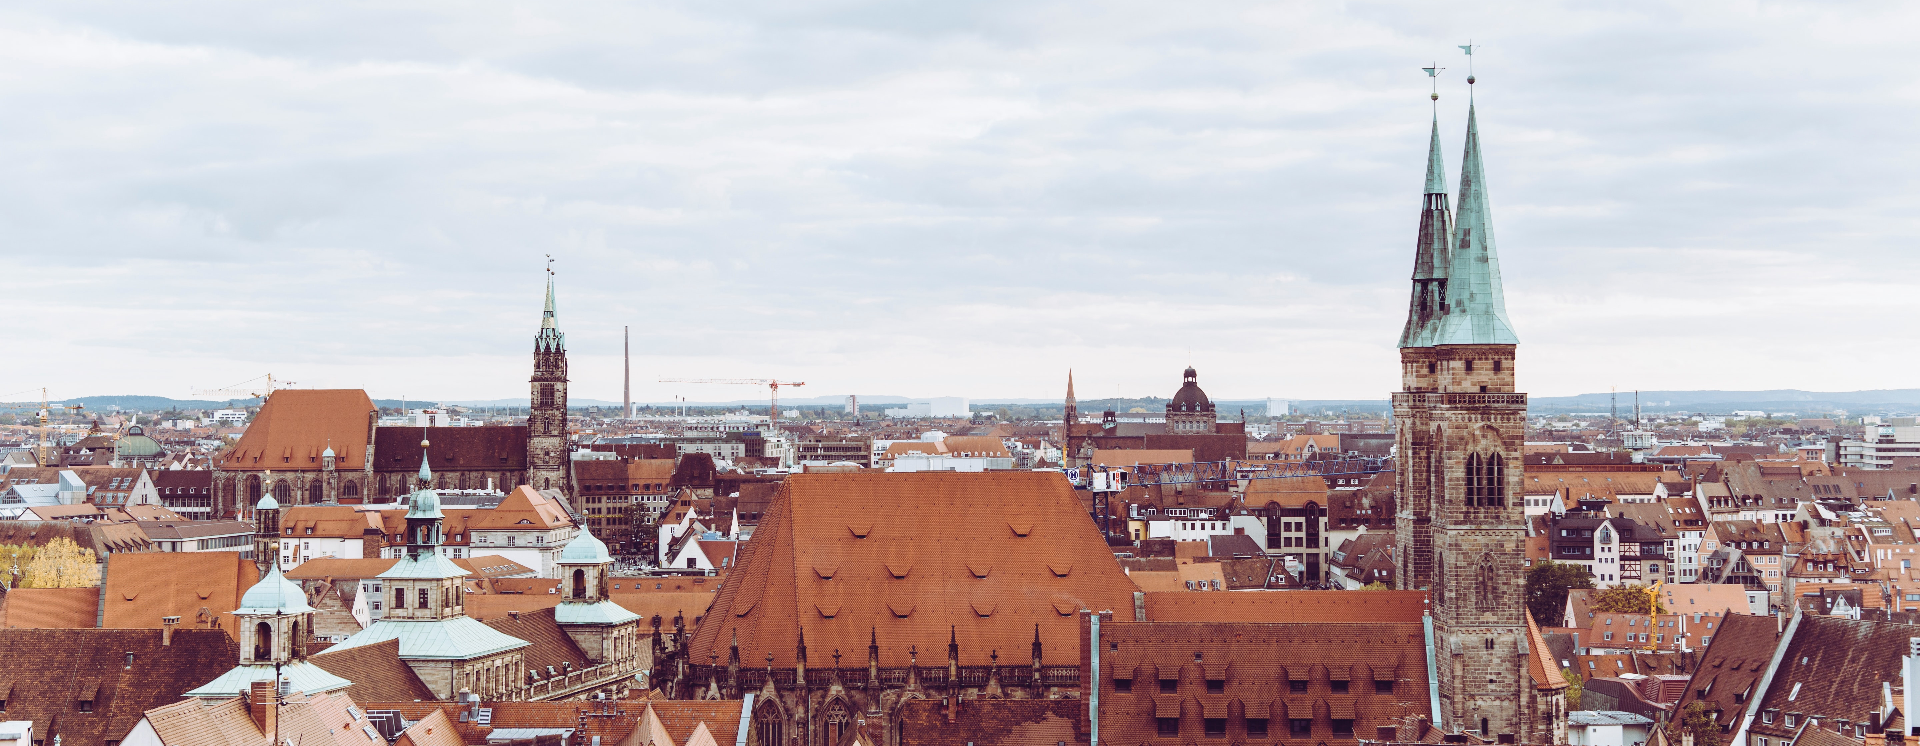 A picture containing the building skyline of the City of Nuremberg in Germany 